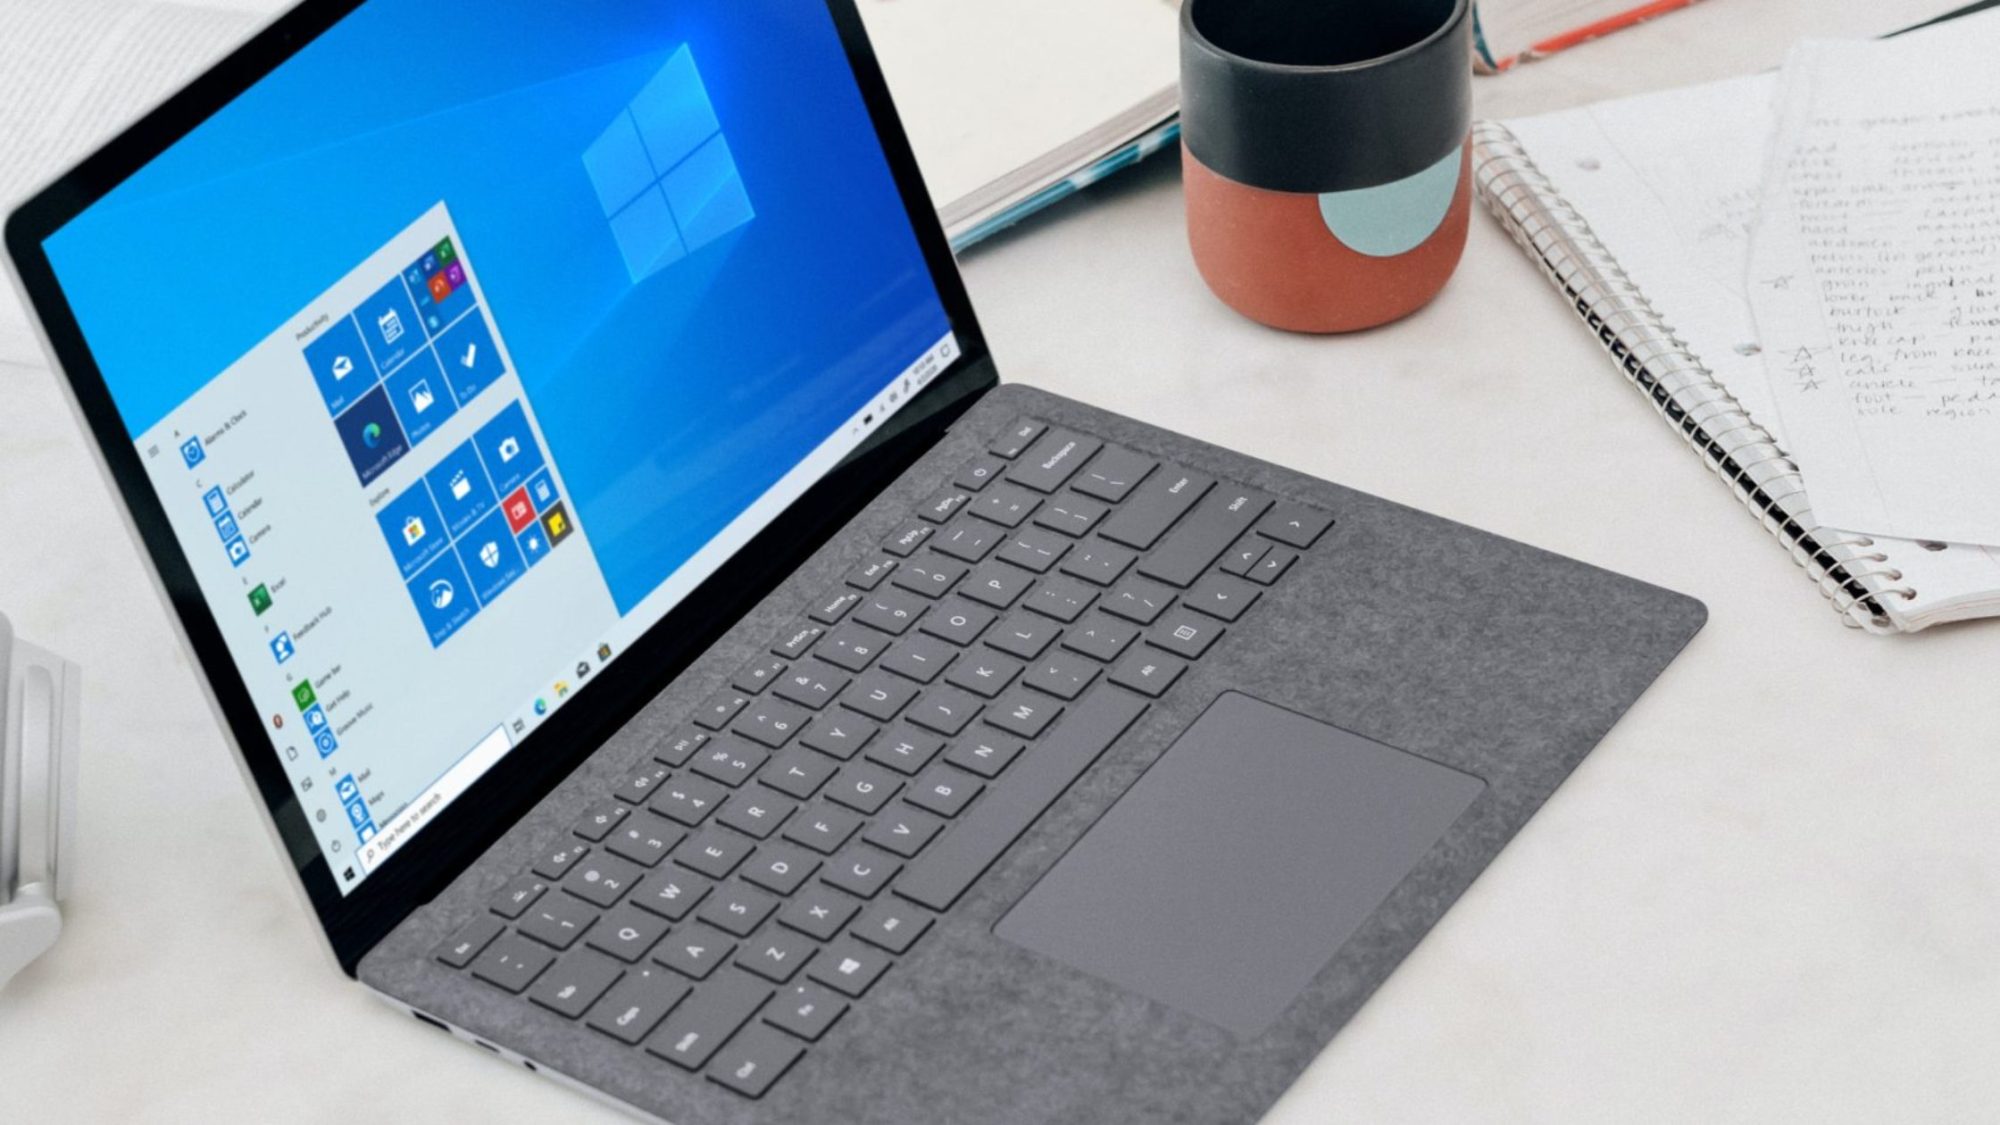 A sleek grey laptop with a Windows operating system is open on a white desk.